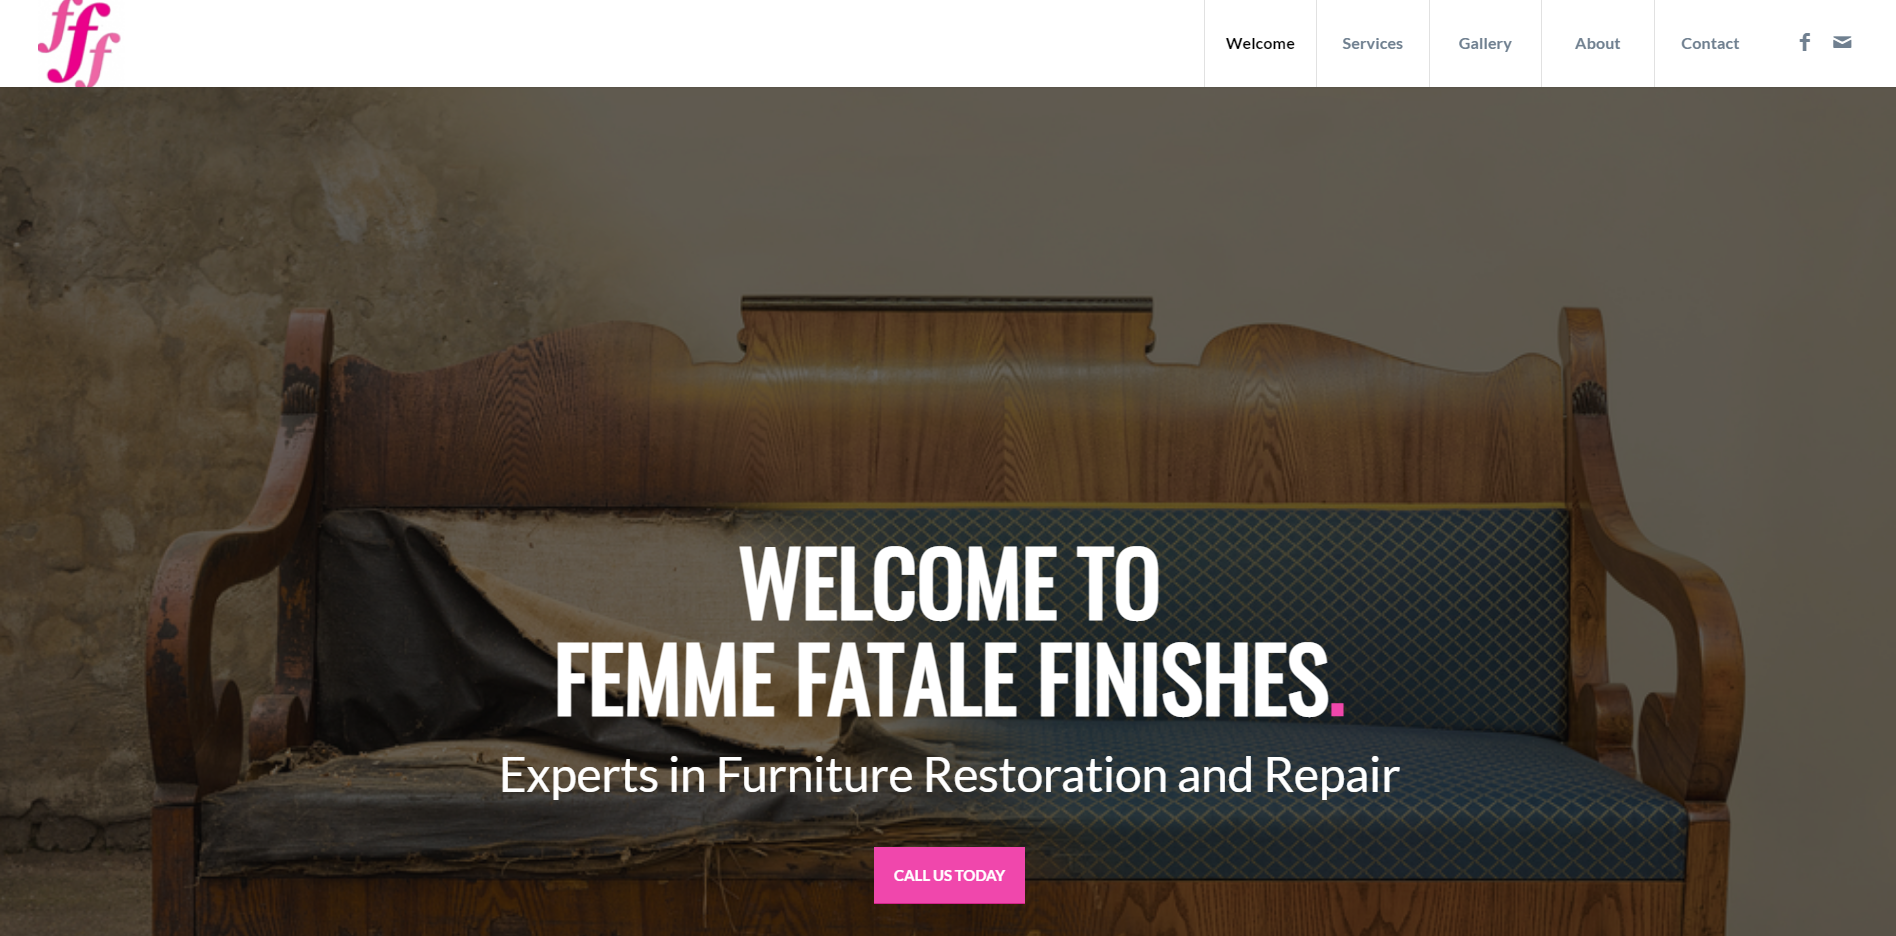 Femme Fatale Finishes